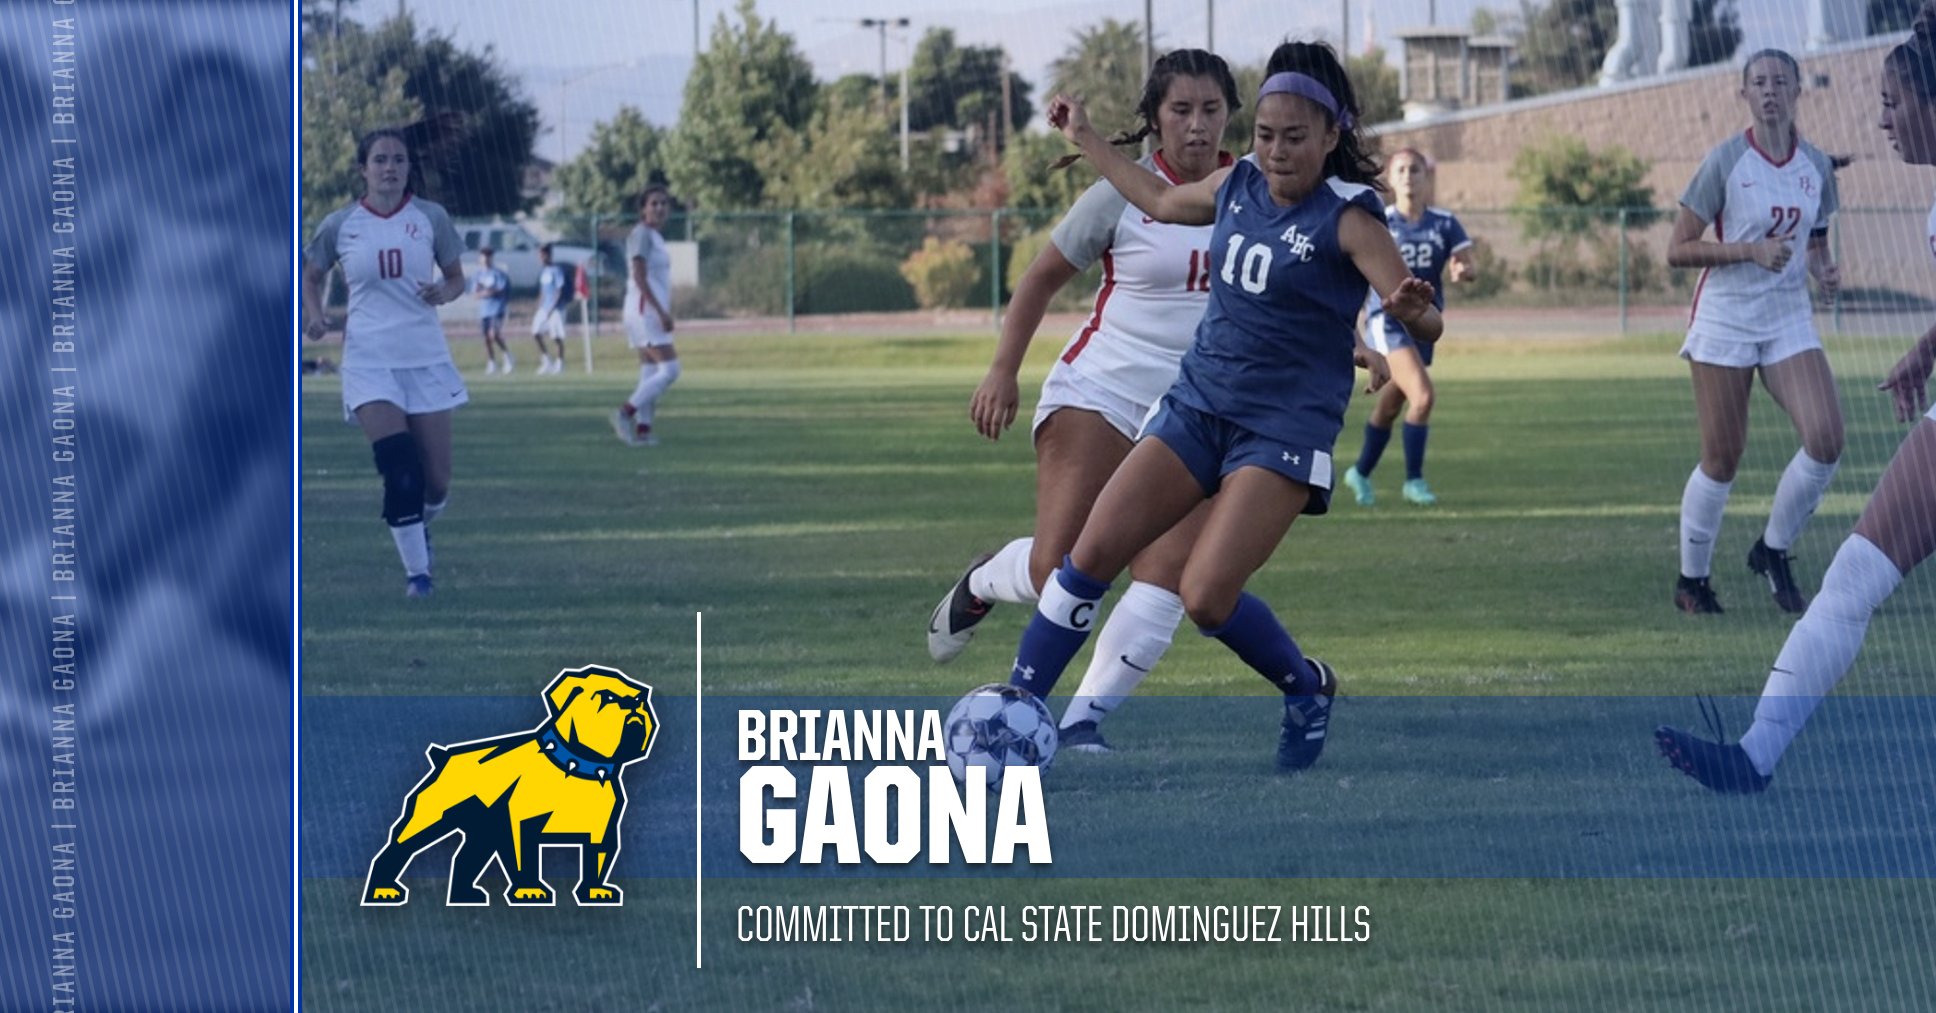 Women's Soccer: Brianna Gaona Commits to Cal State Dominguez Hills